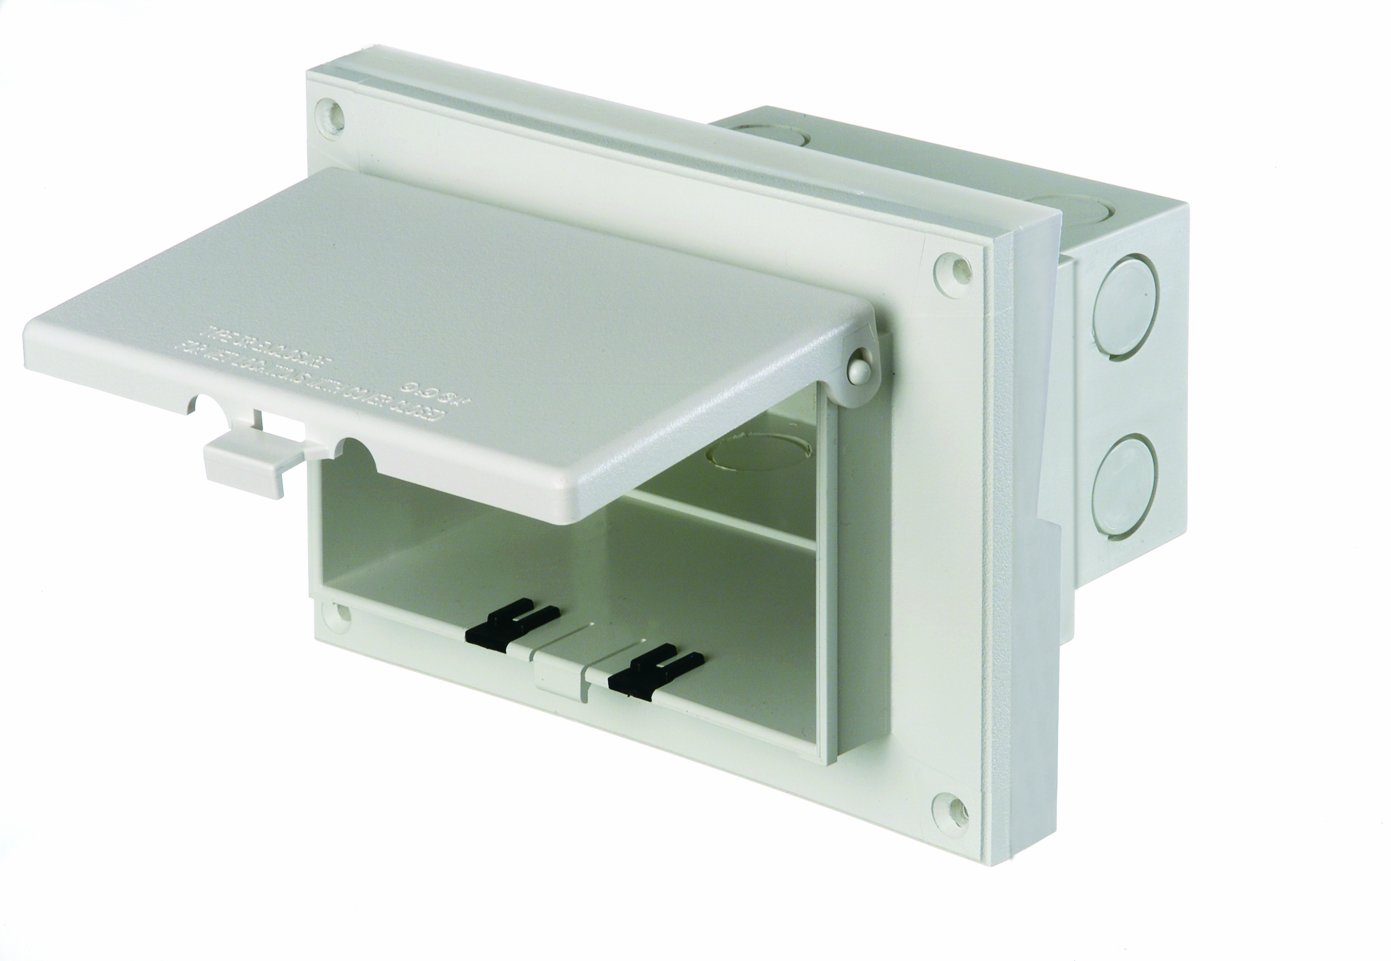 Arlington DBHR131W-1 Low Profile IN BOX Electrical Box with Weatherproof Cover for Retrofit Siding Construction, 1/4-Inch or 5/1